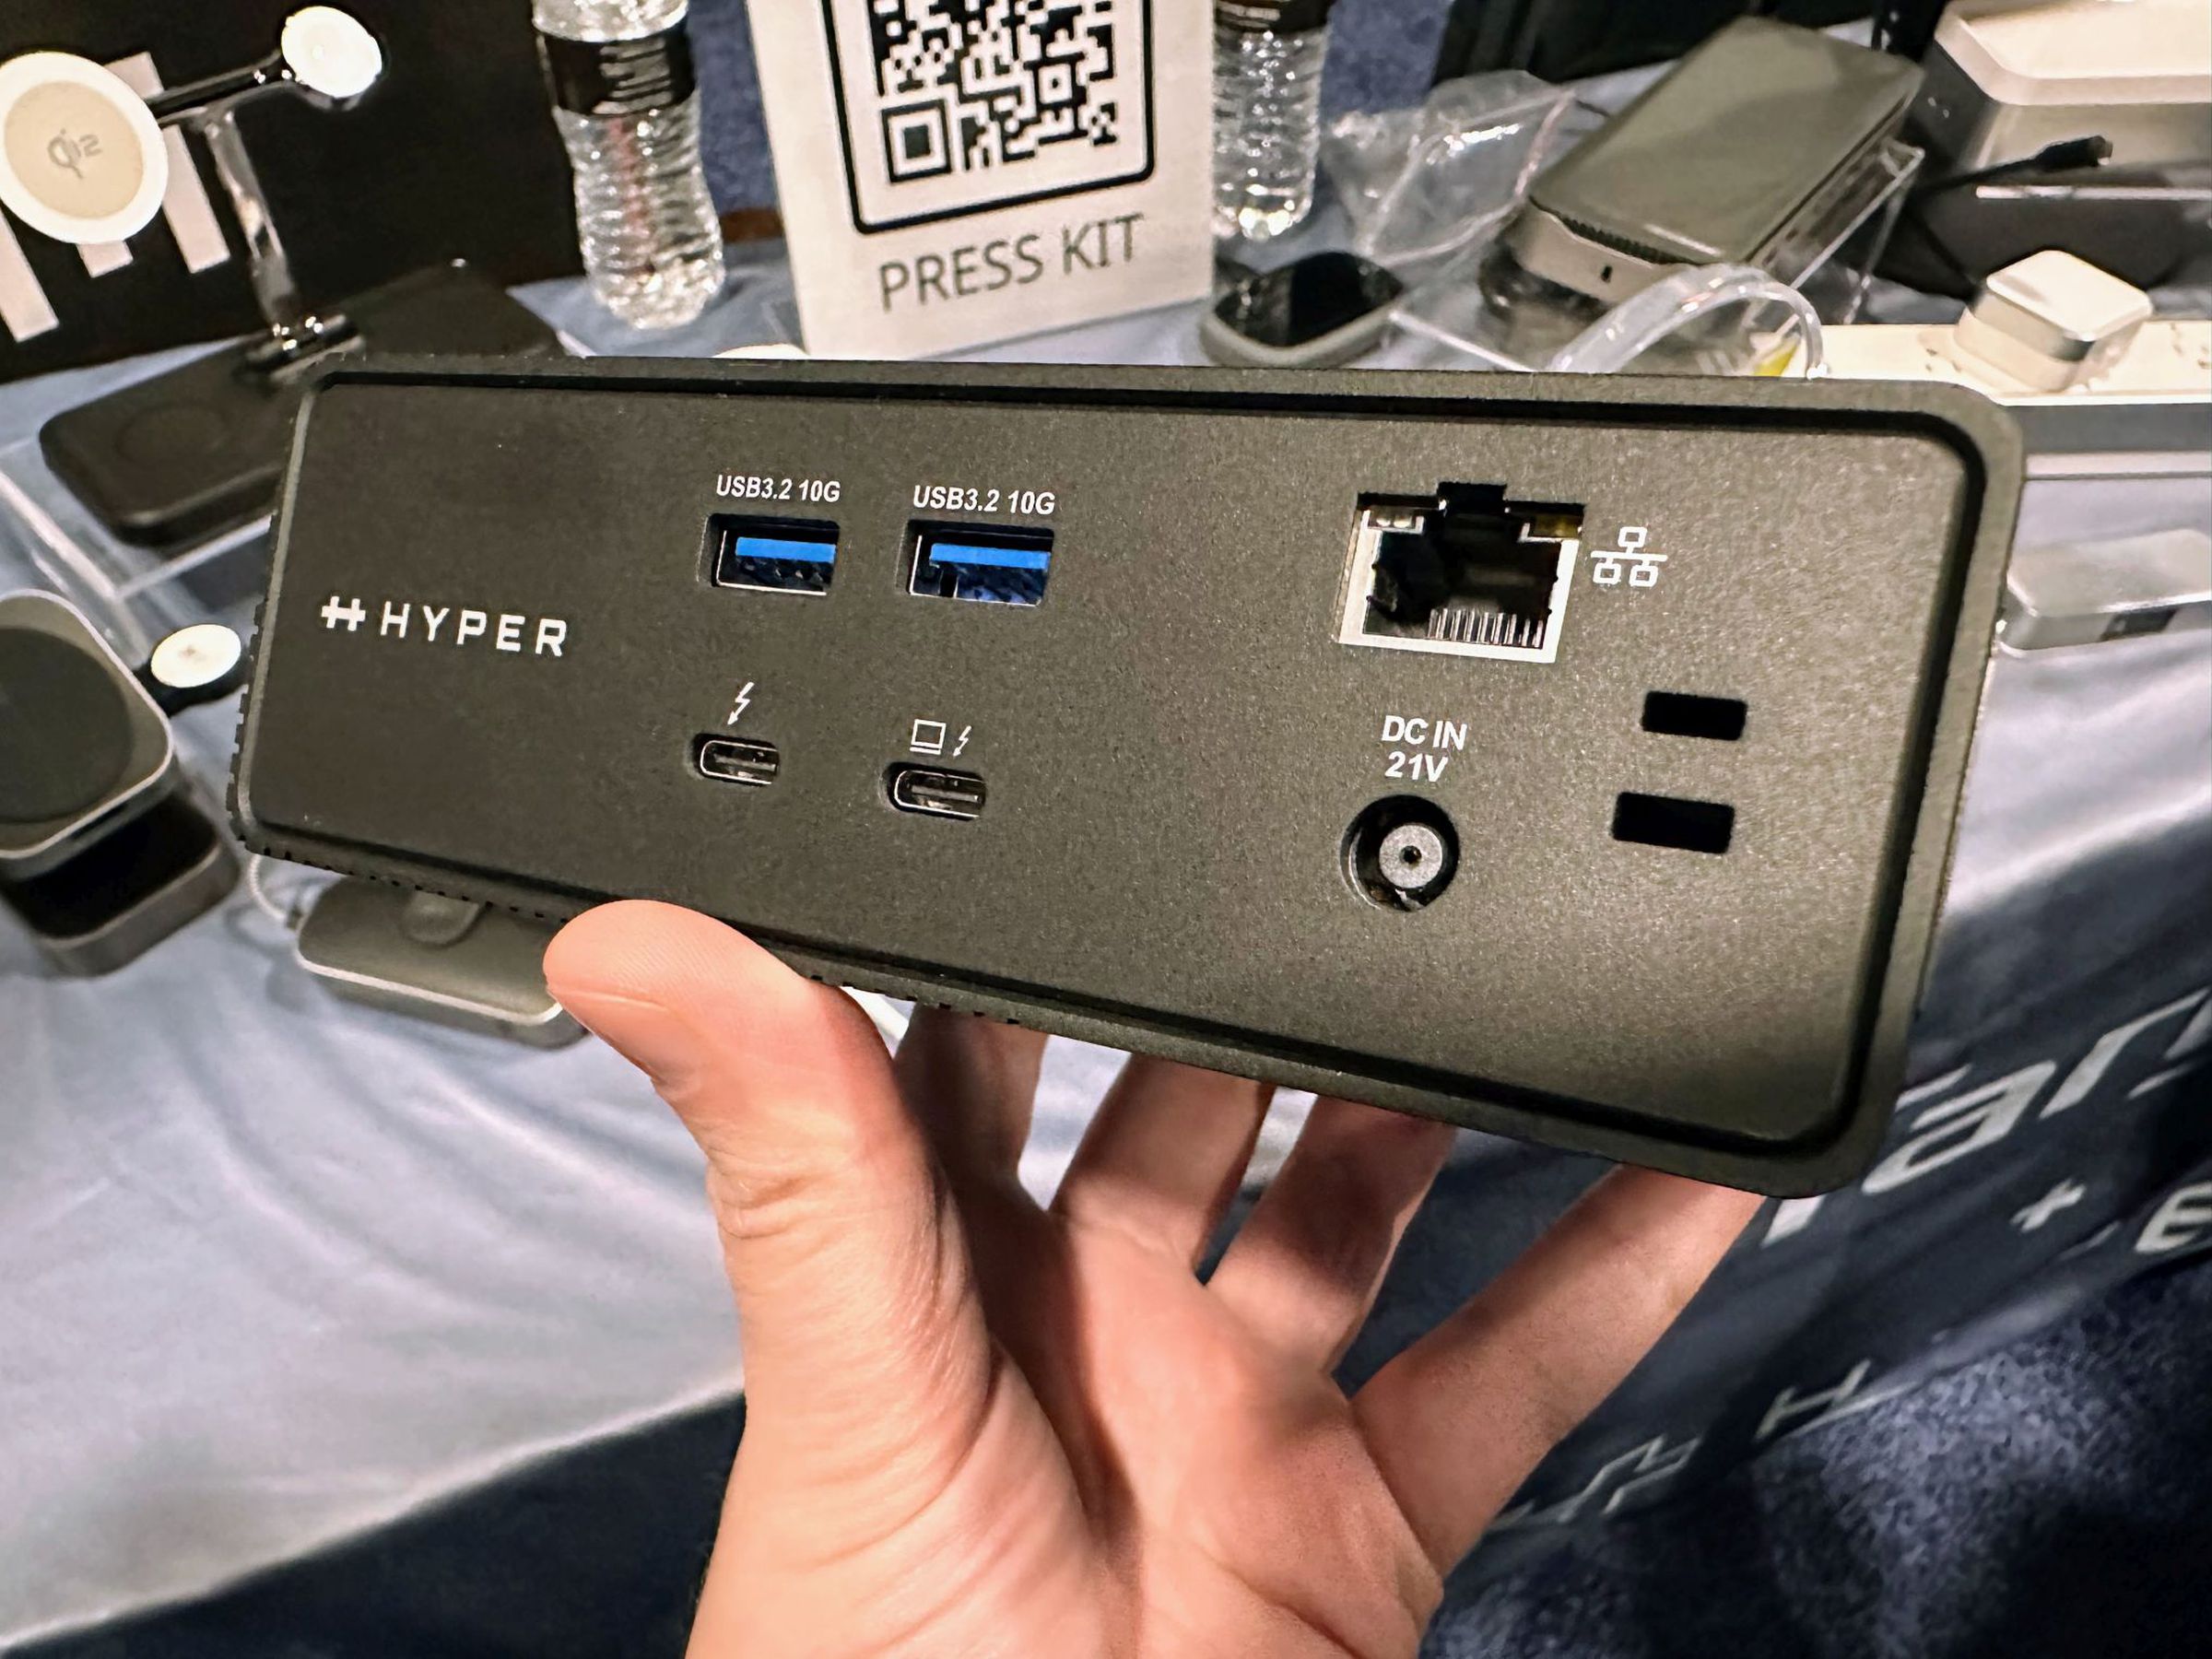 <a href="https://www.hypershop.com/products/hyperdrive-next-thunderbolt-5-dock'"><em>Hyper’s Next Thunderbolt 5 Dock</em></a> appears to be $400. It’s got up to 120Gbps data speeds as well and also has room for an NVMe SSD inside.